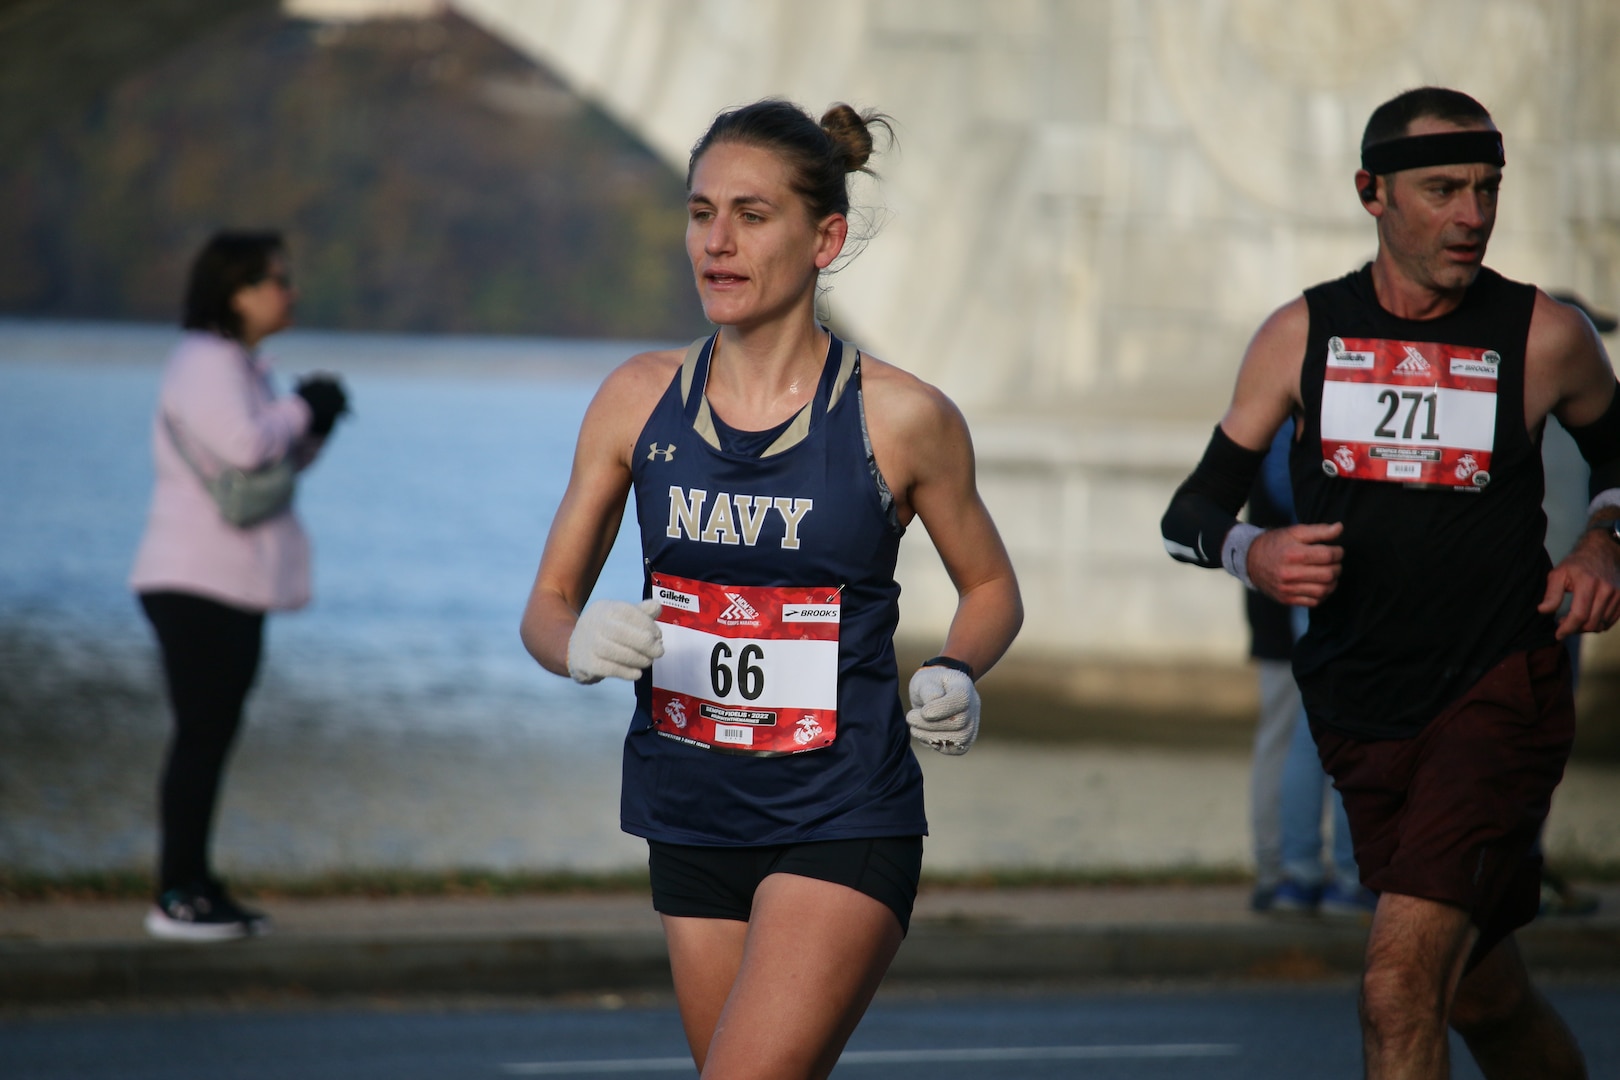 Navy Lt. Cmdr. Katherine Irgens of Naval Submarine Base New London, Conn.  jumps out in front of the competition to win the Armed Forces Women's Gold.  The 2022 Armed Forces Marathon Championship held in conjunction with the 47th Marine Corps Marathon in Washington, D.C.  The Armed Forces Championship features teams from the Marine Corps, Navy (with Coast Guard runners), and Air Force.  Department of Defense Photo by Mr. Steven Dinote - Released.